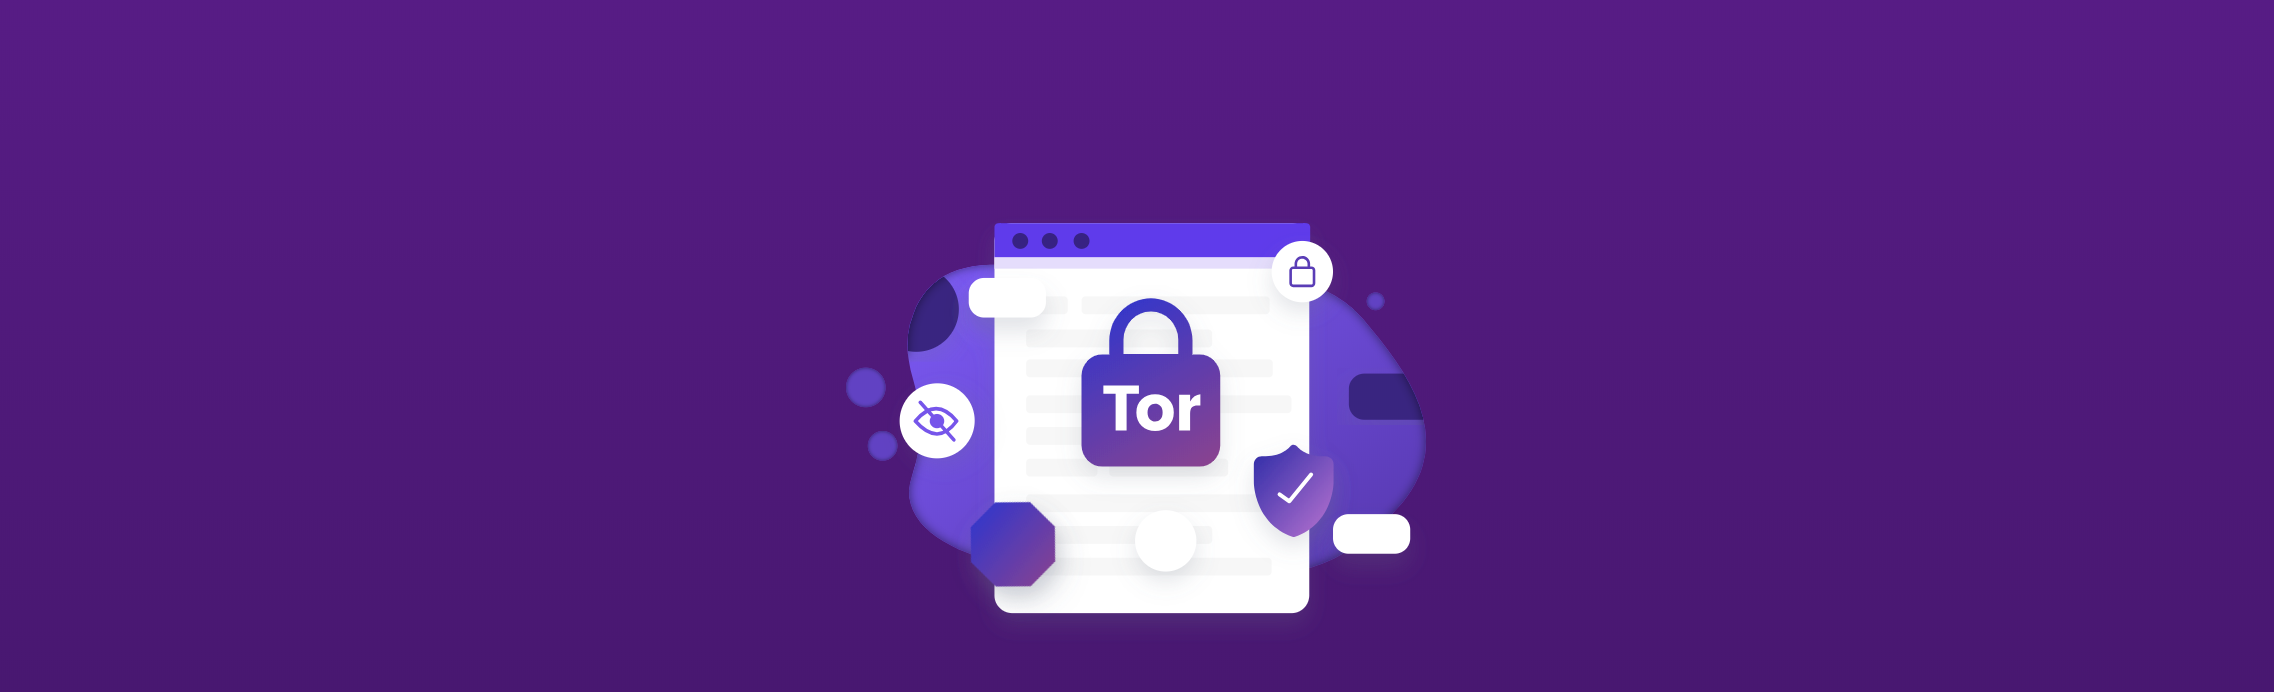 what is the use of tor browser mega